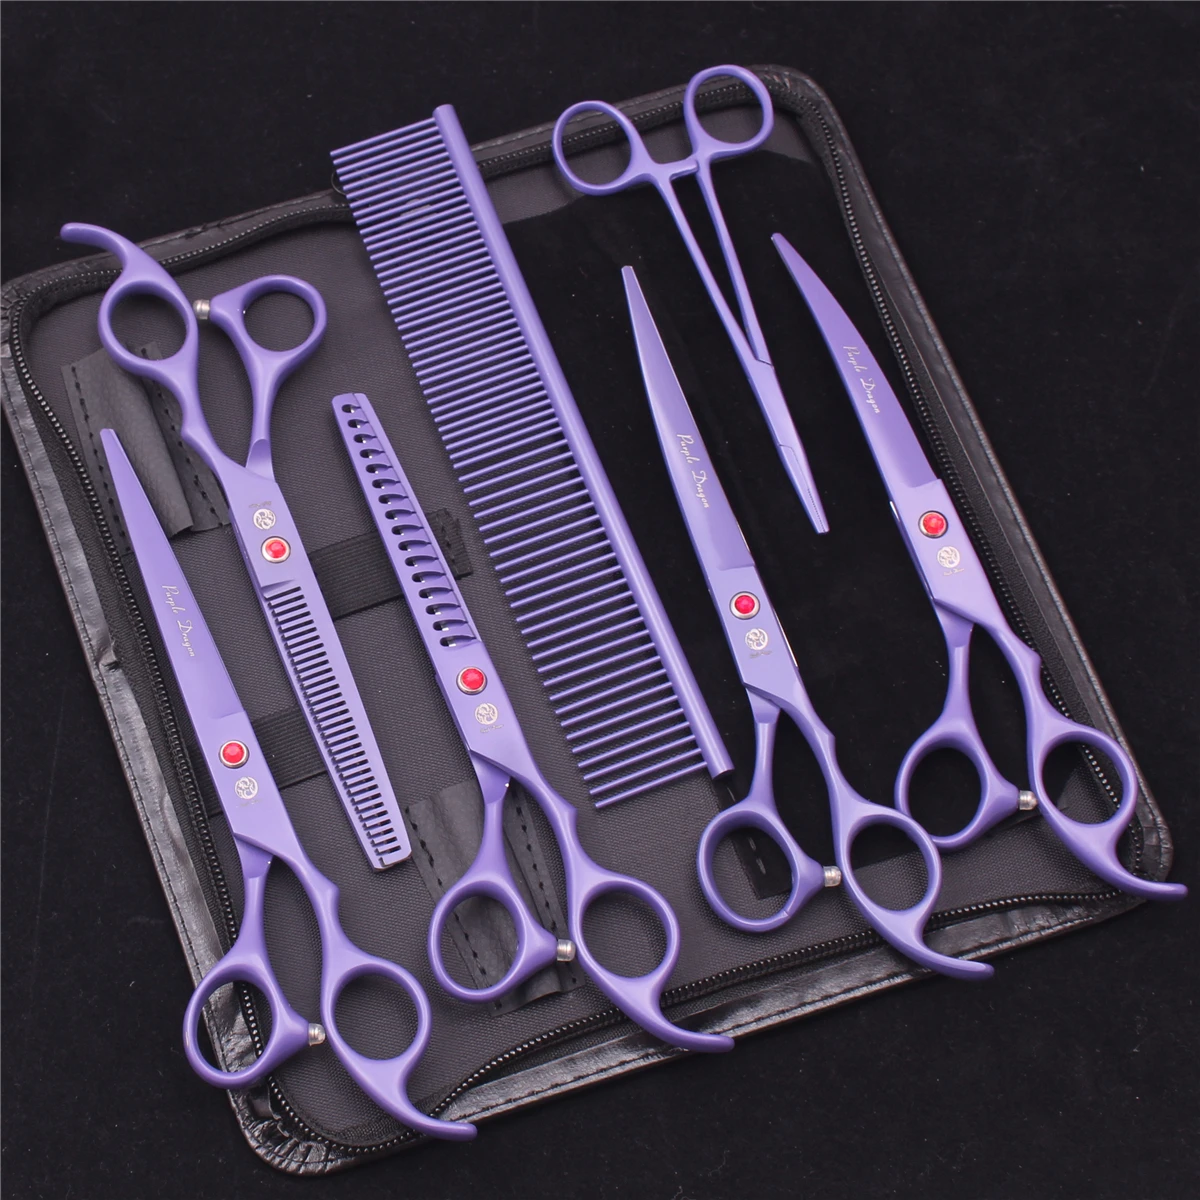 7.0 Pet Grooming Scissors Set Japanese Steel Straight Curved Dog Cat Cutting Thinning Shears Hair Comb Hemostatic Forceps Z3103